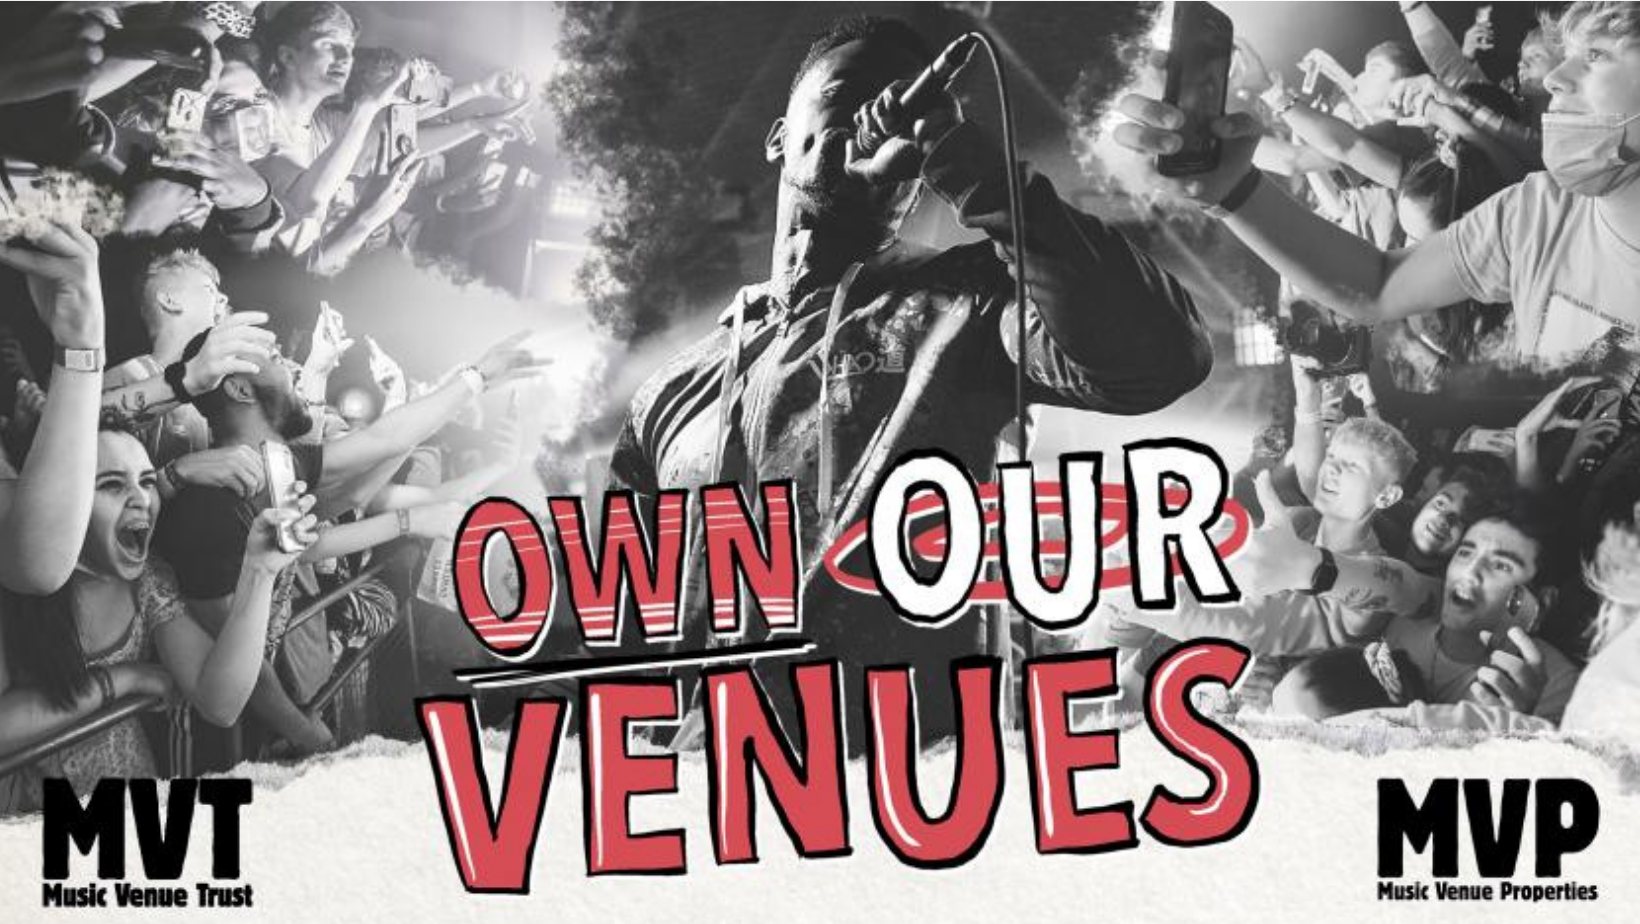 NEWS:  Music Venue Trust launches new initiative to Own Our Venues